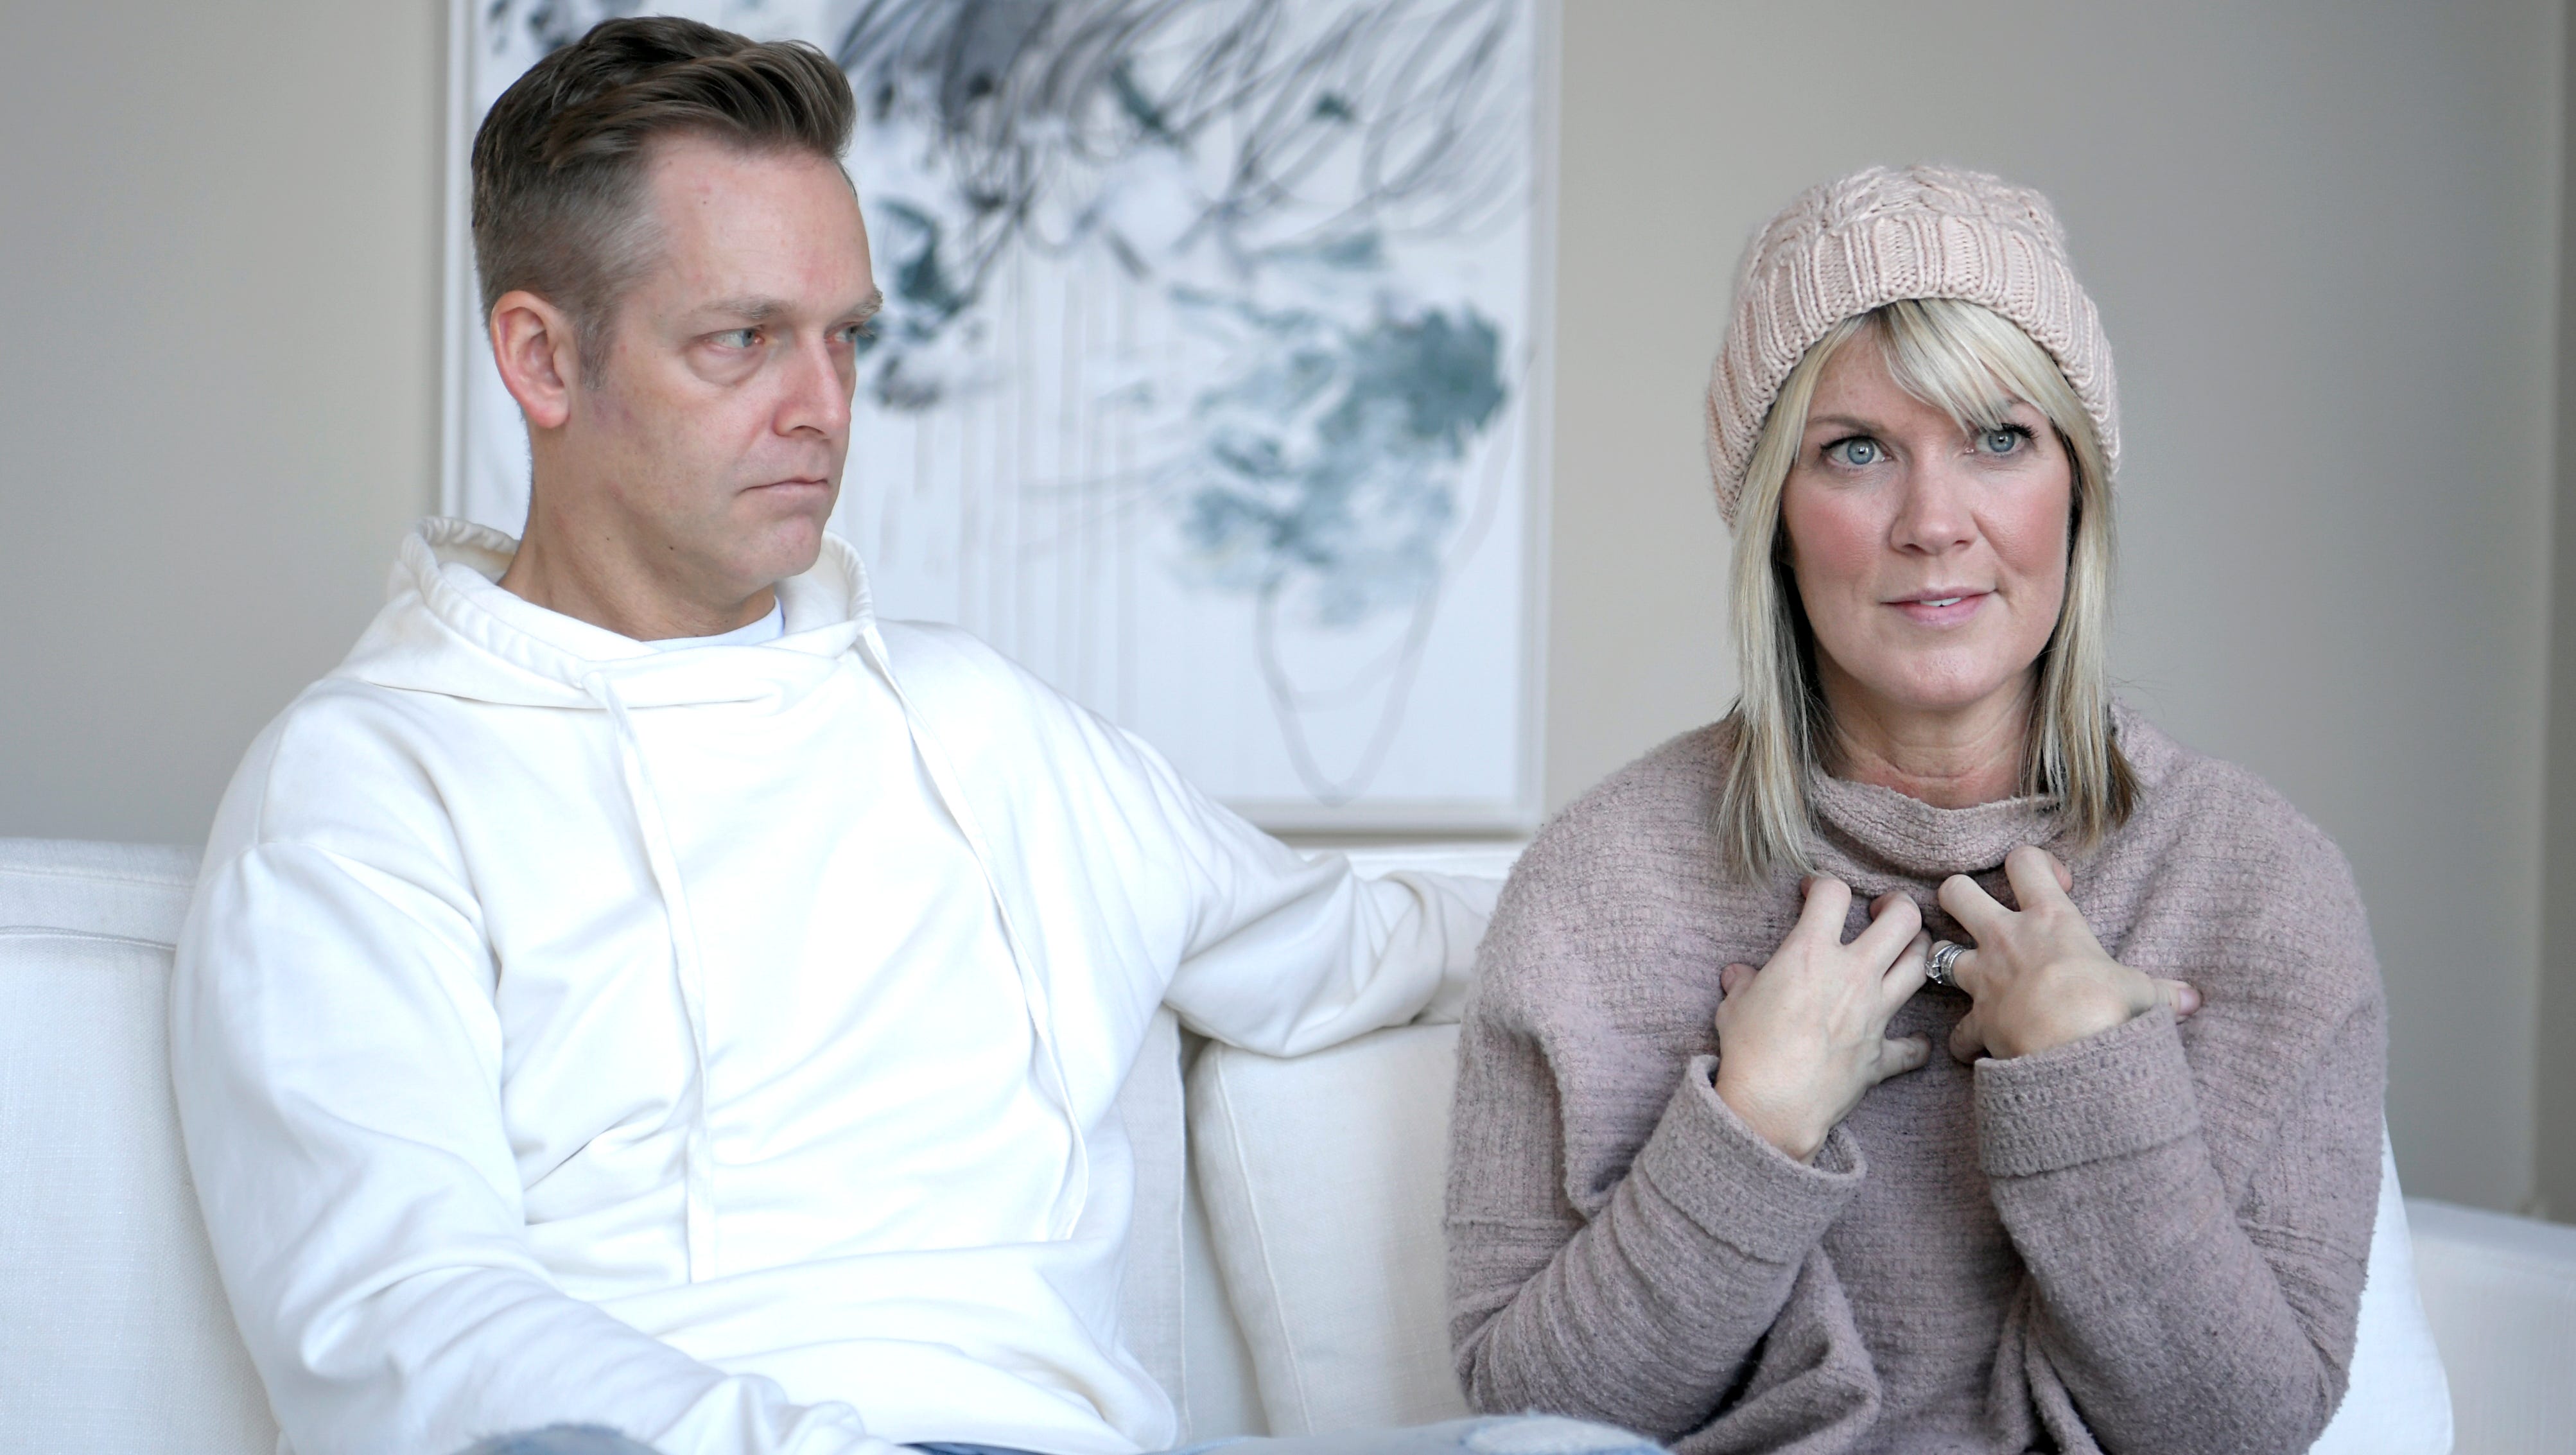 Grammy Award-winning producer and musician Bernie Herms with his wife and Christian music artist Natalie Grant talk about recovering from thyroid surgery at their home in Brentwood, Tenn on Thursday, May 19. January 1, 2018.